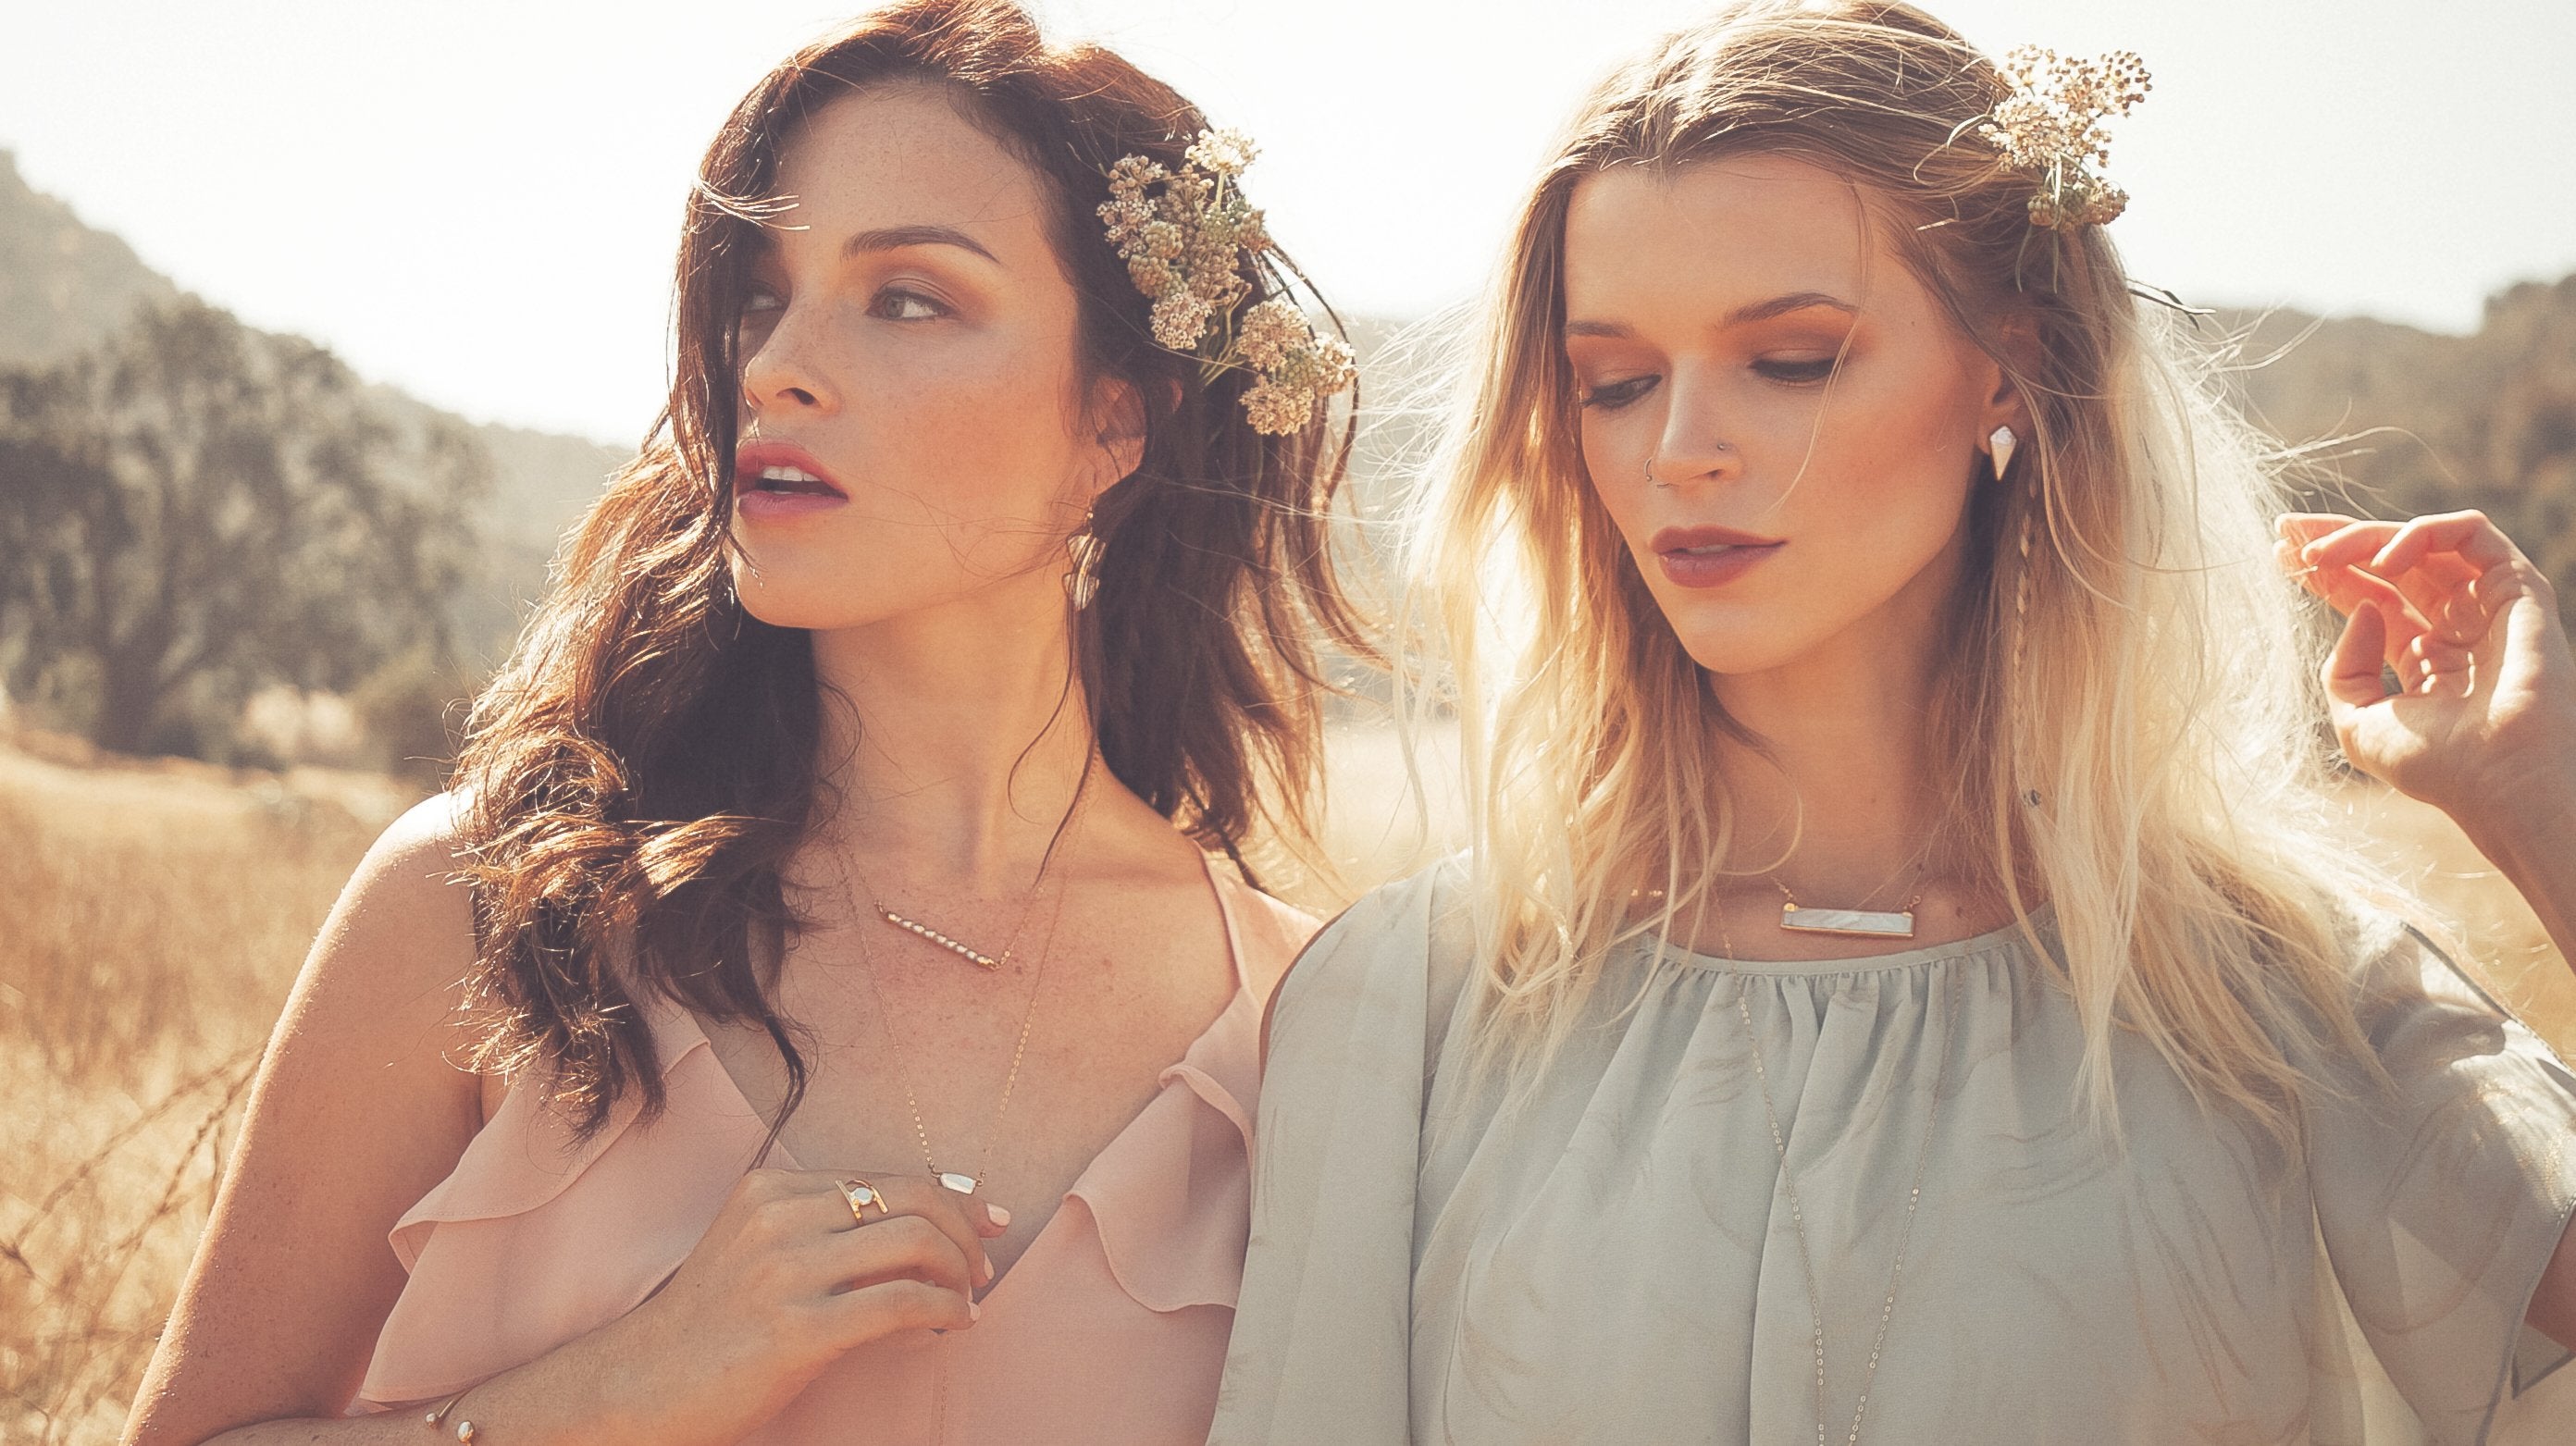 the best jewelry to wear to the beach and in the sun for women.  Turquiose and rose quartz jewelry with gold earrings and necklaces.  Dainty and classic gold and silver jewelry. 